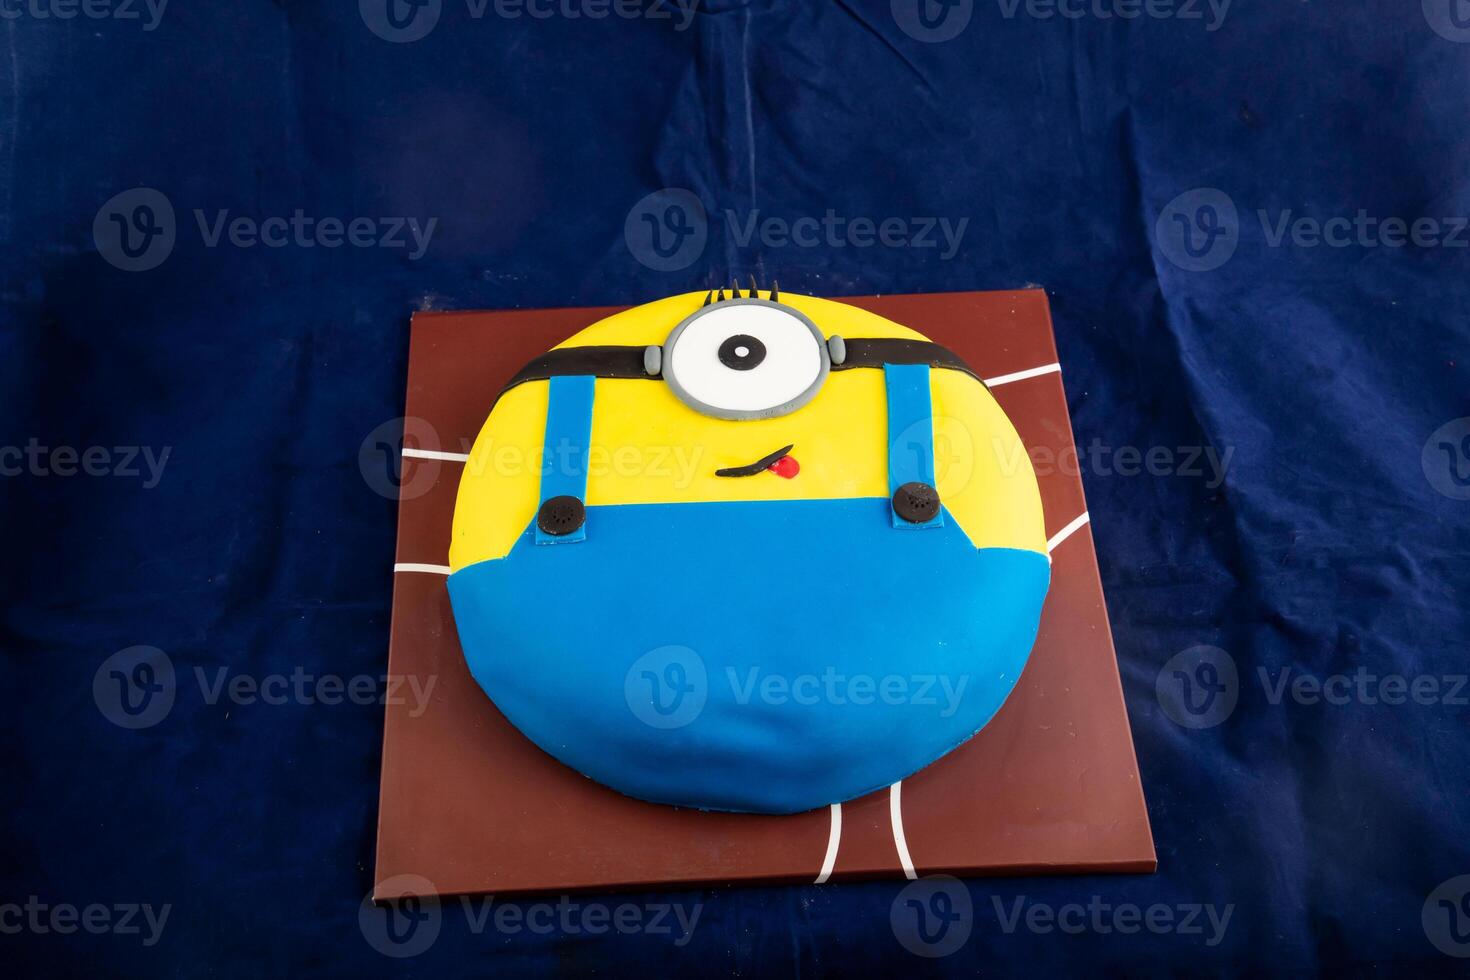 Minion Cake served on board isolated on napkin side view of cafe baked food photo